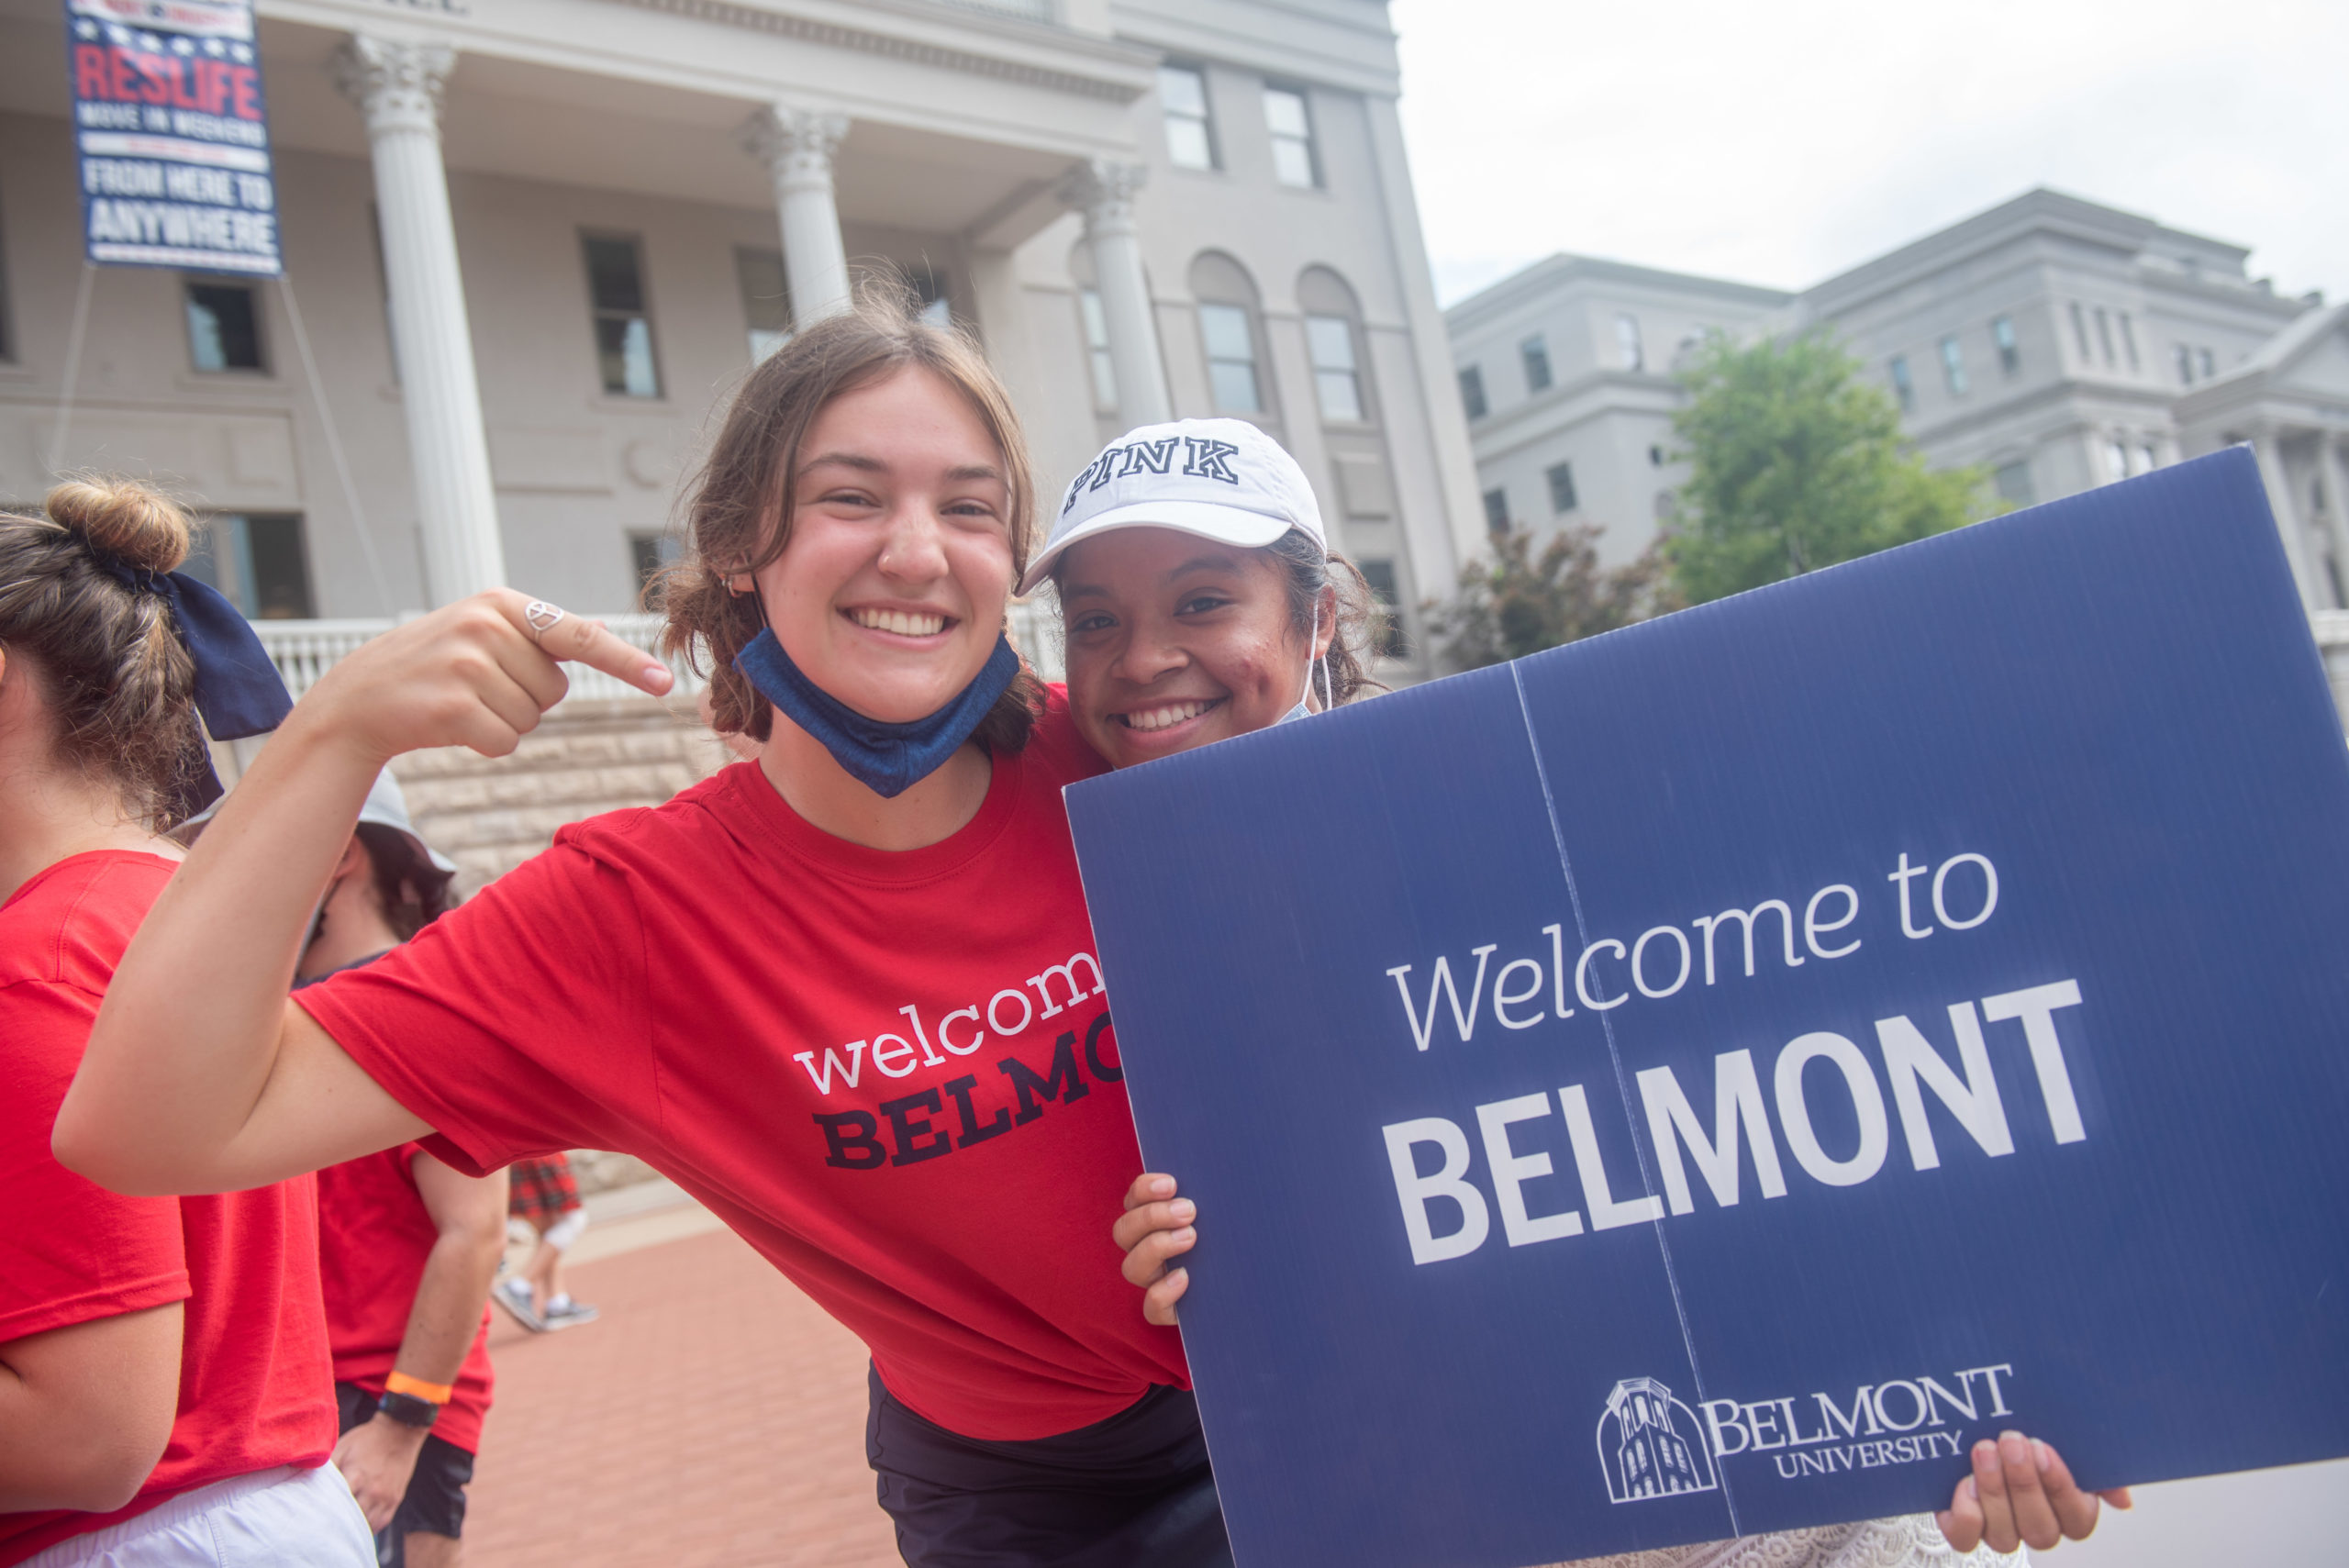 U.S. News and World Report Includes Belmont University Numerous Times